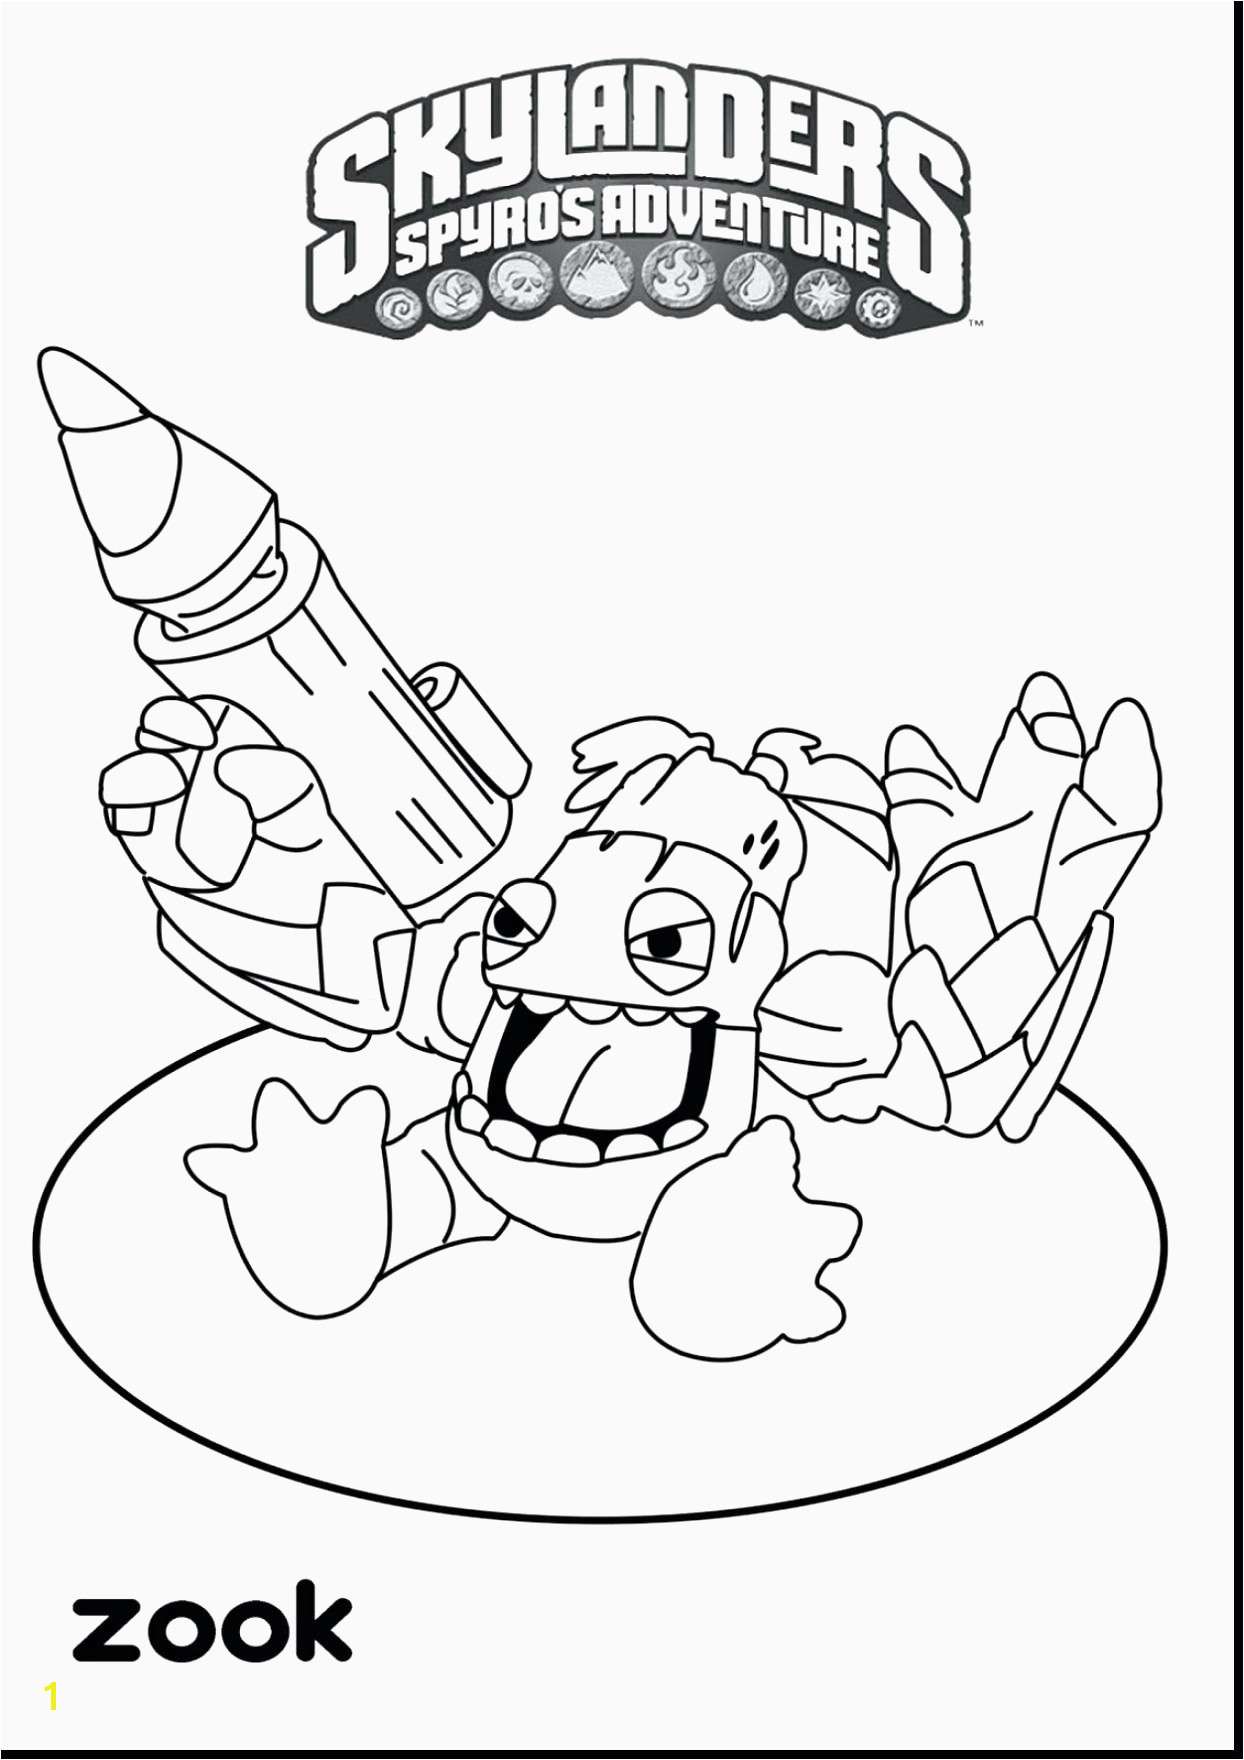 Suicide Squad Harley Quinn Coloring Pages Suicide Squad Harley Quinn Coloring Pages – Free Coloring Sheets